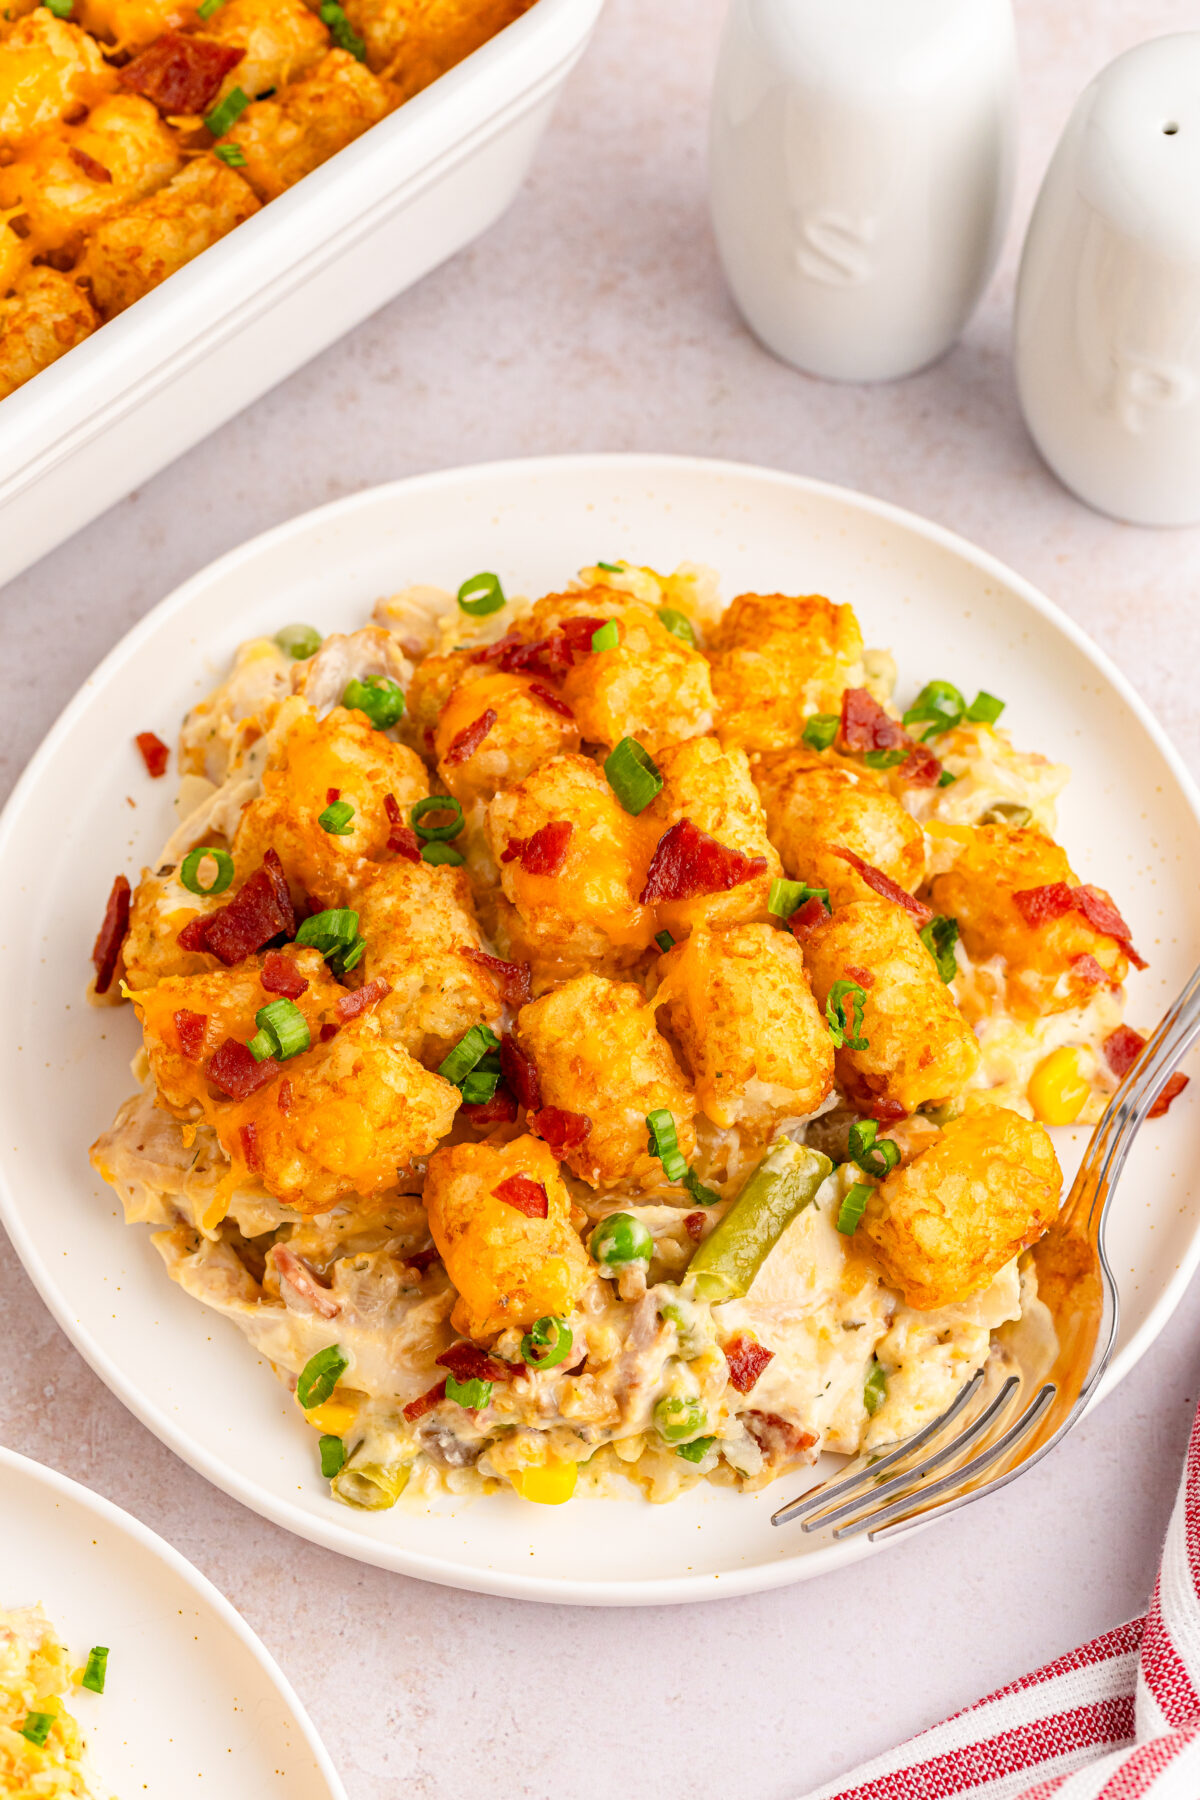 Craving comfort food? Look no further than our mouth-watering chicken tater tot casserole recipe. Perfect for any night of the week!